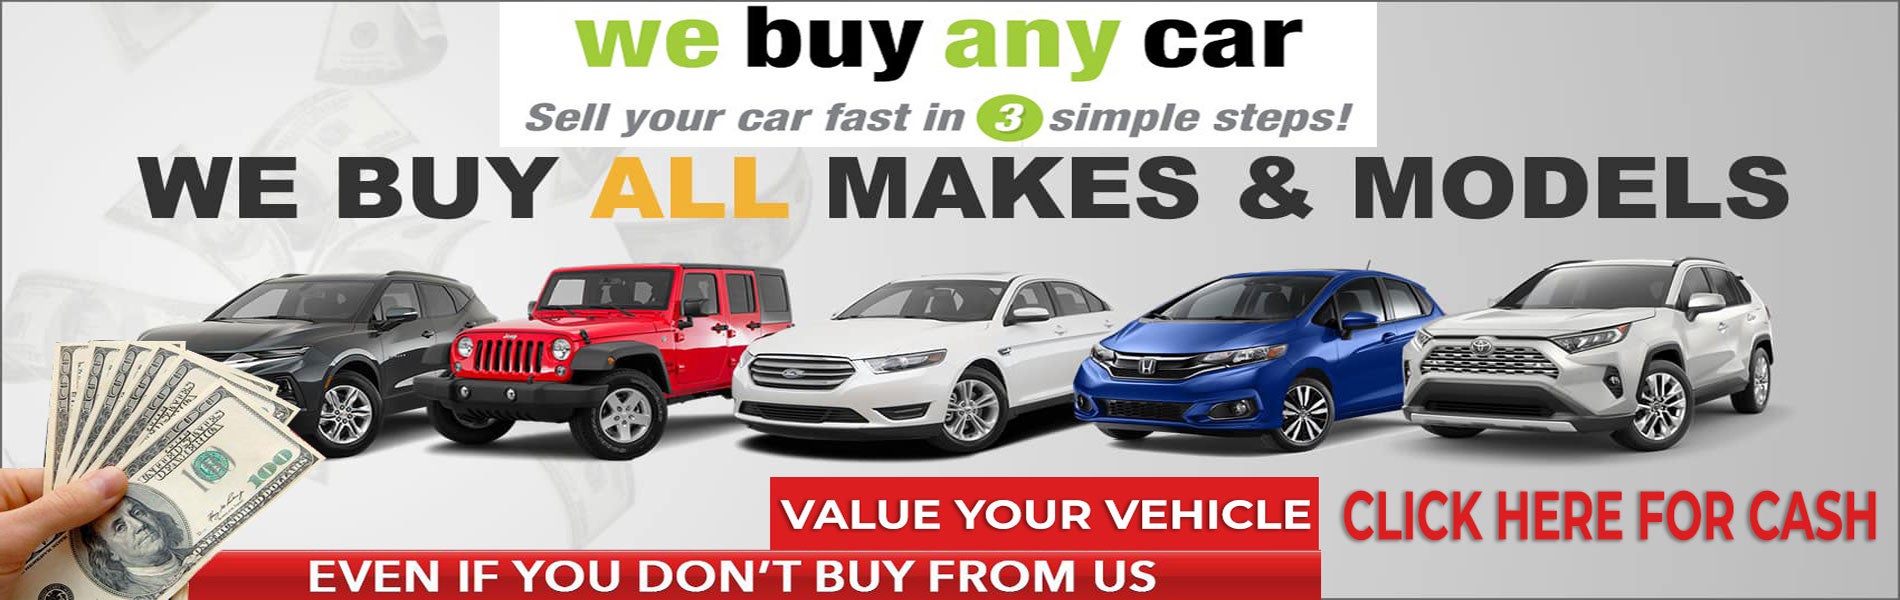 Cars For Cash We buy all Makes and Models